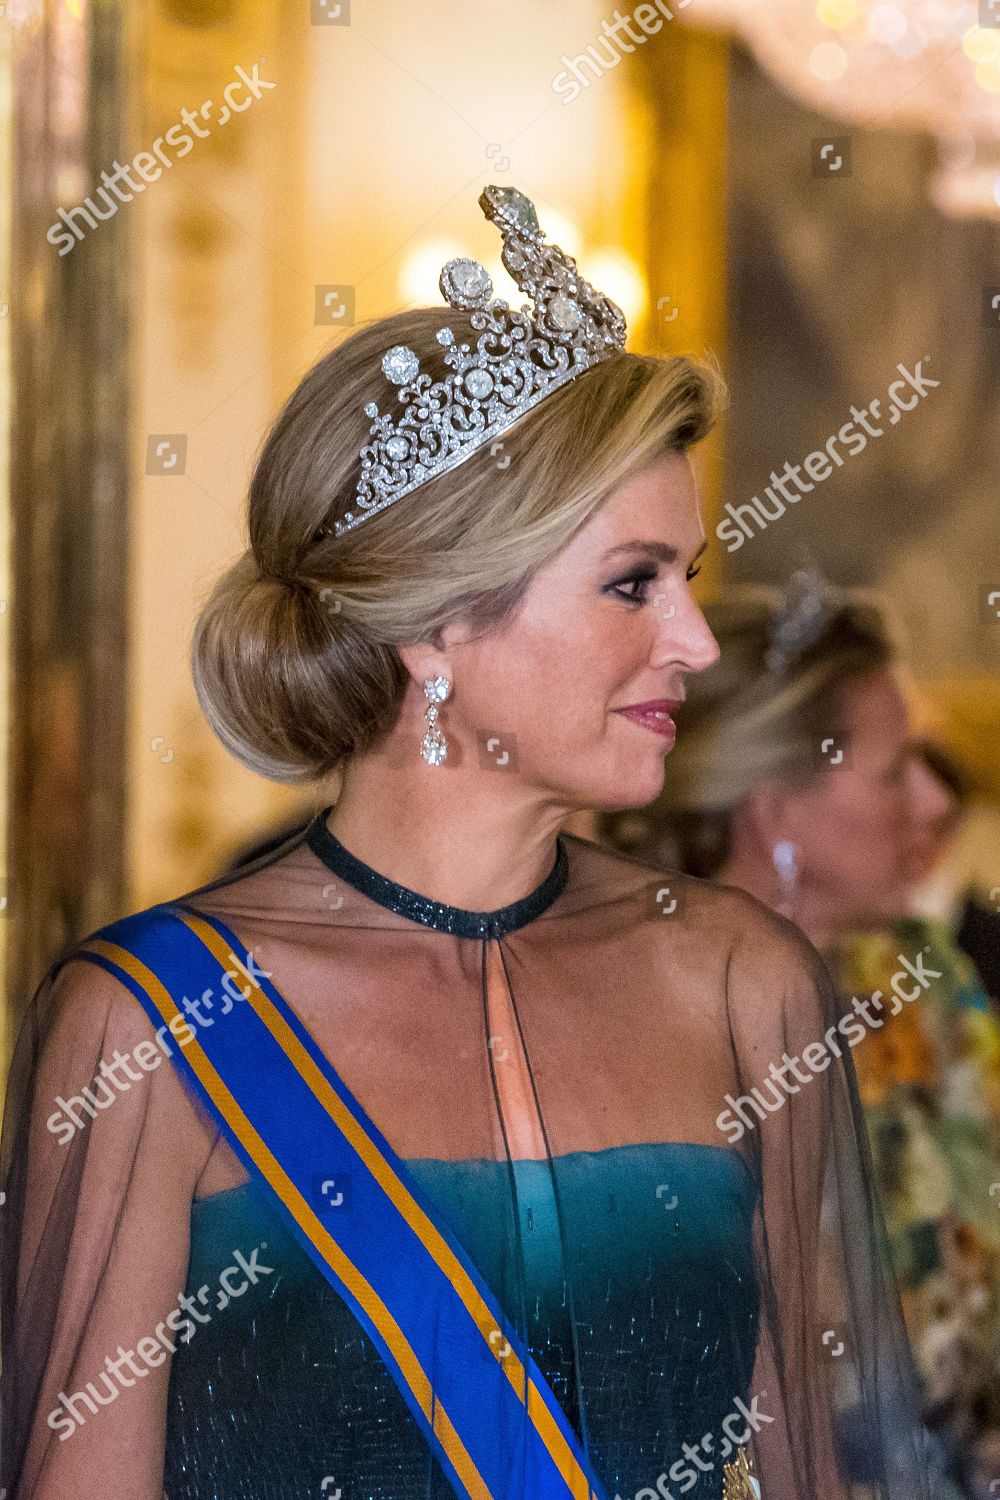 state-visit-of-the-king-and-queen-of-the-netherlands-london-uk-shutterstock-editorial-9942632ar.jpg